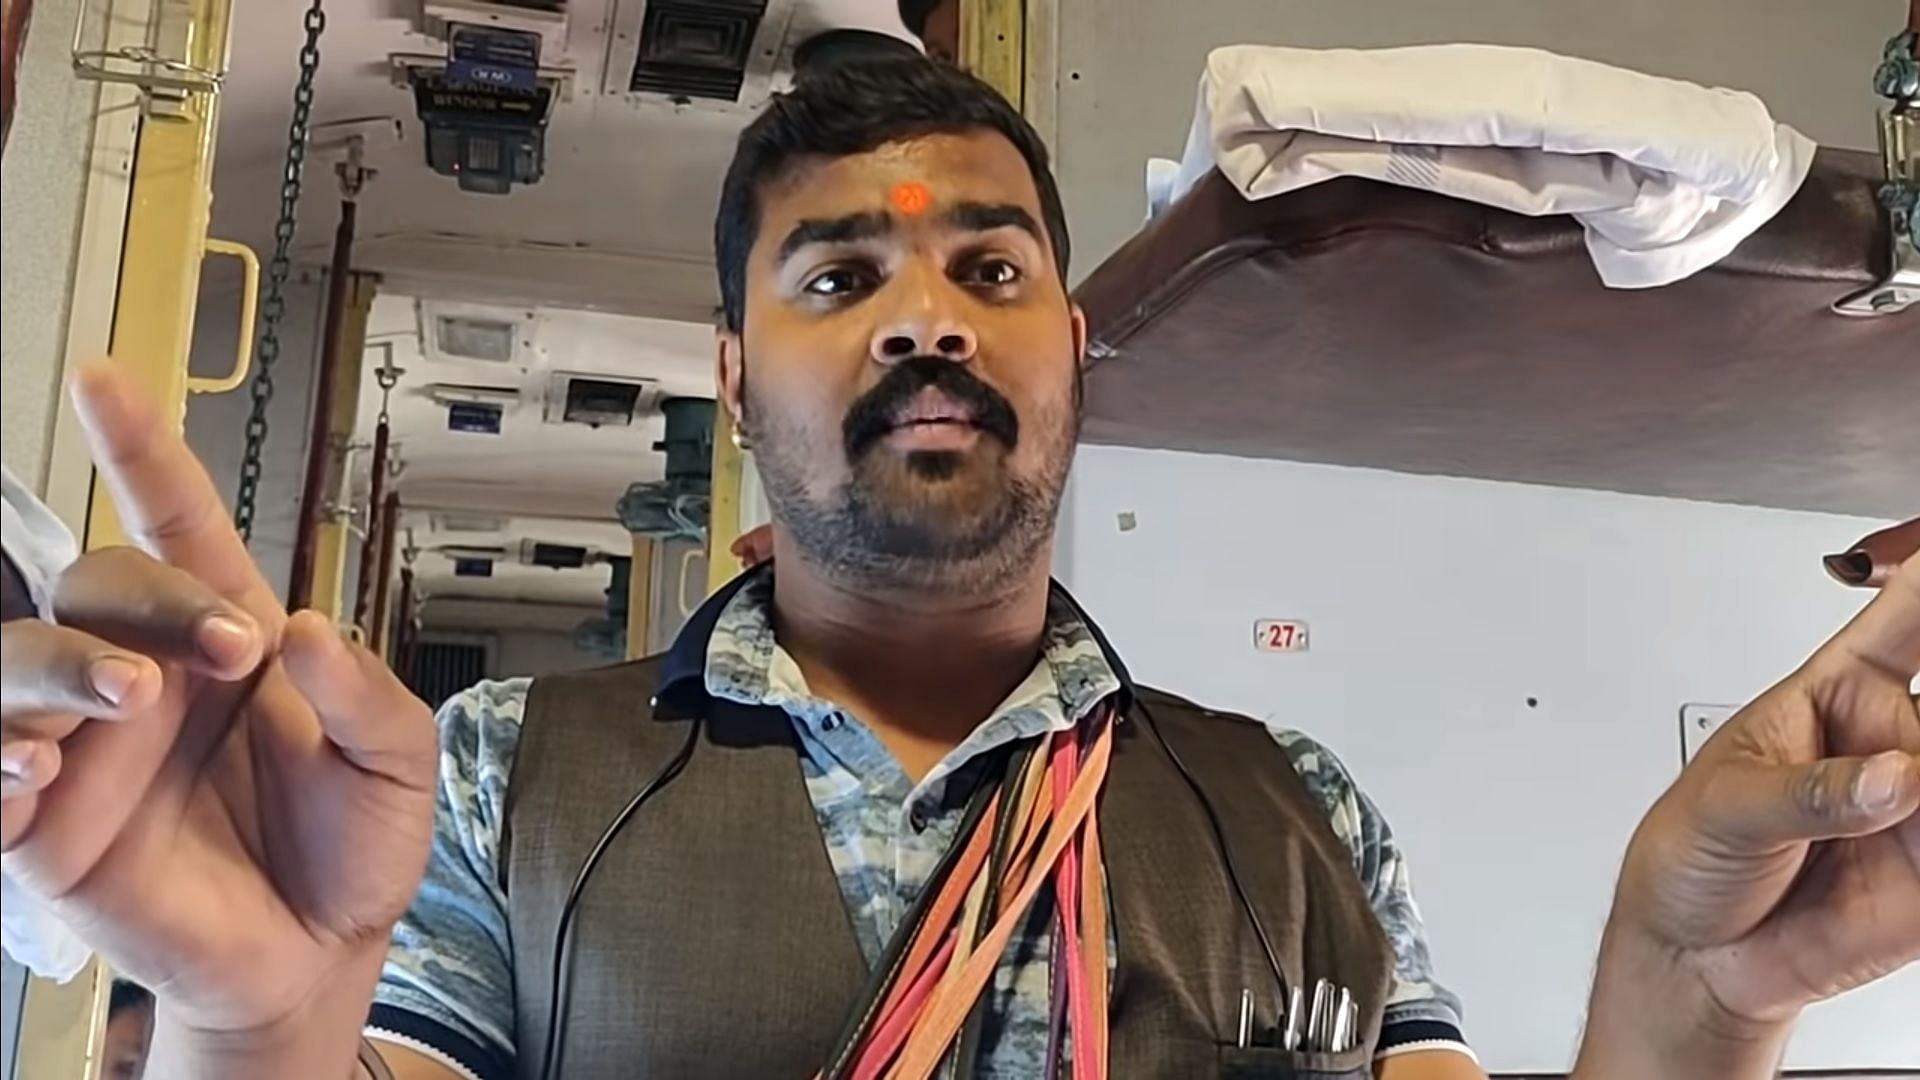 Avdesh Dubey shot to fame after a video of him mimicking politicians like Prime Minister Narendra Modi, Congress leaders Sonia Gandhi, Rahul Gandhi, and Delhi Chief Minister Arvind Kejriwal, while selling toys to the passengers on a train, went viral.